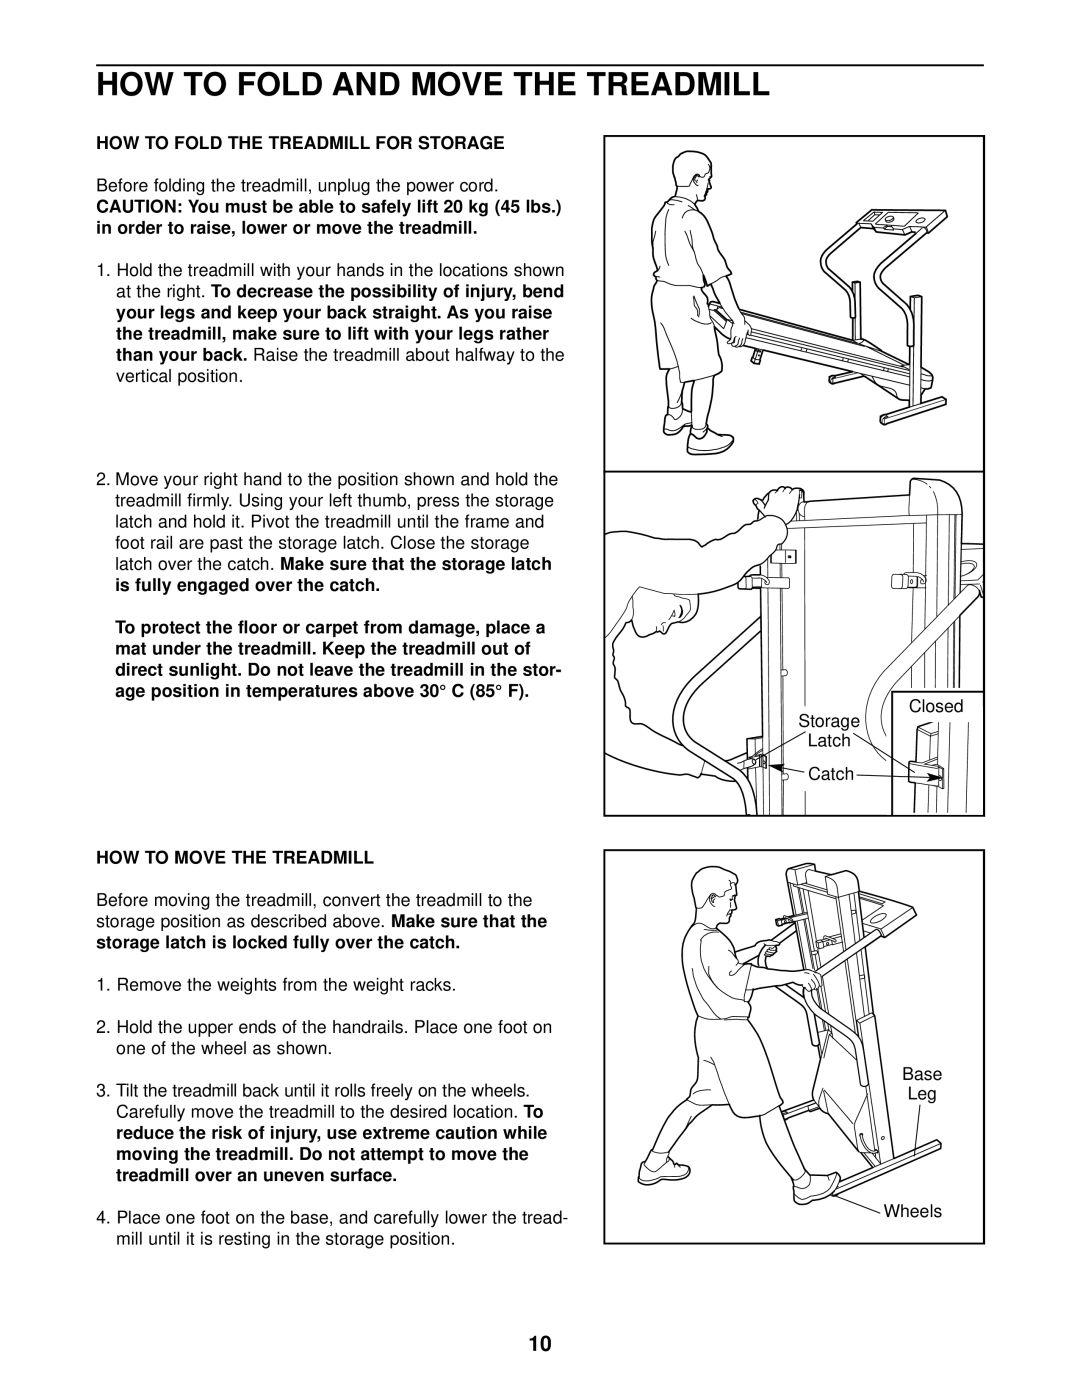 Weslo WCTL29200 How To Fold And Move The Treadmill, How To Fold The Treadmill For Storage, How To Move The Treadmill 